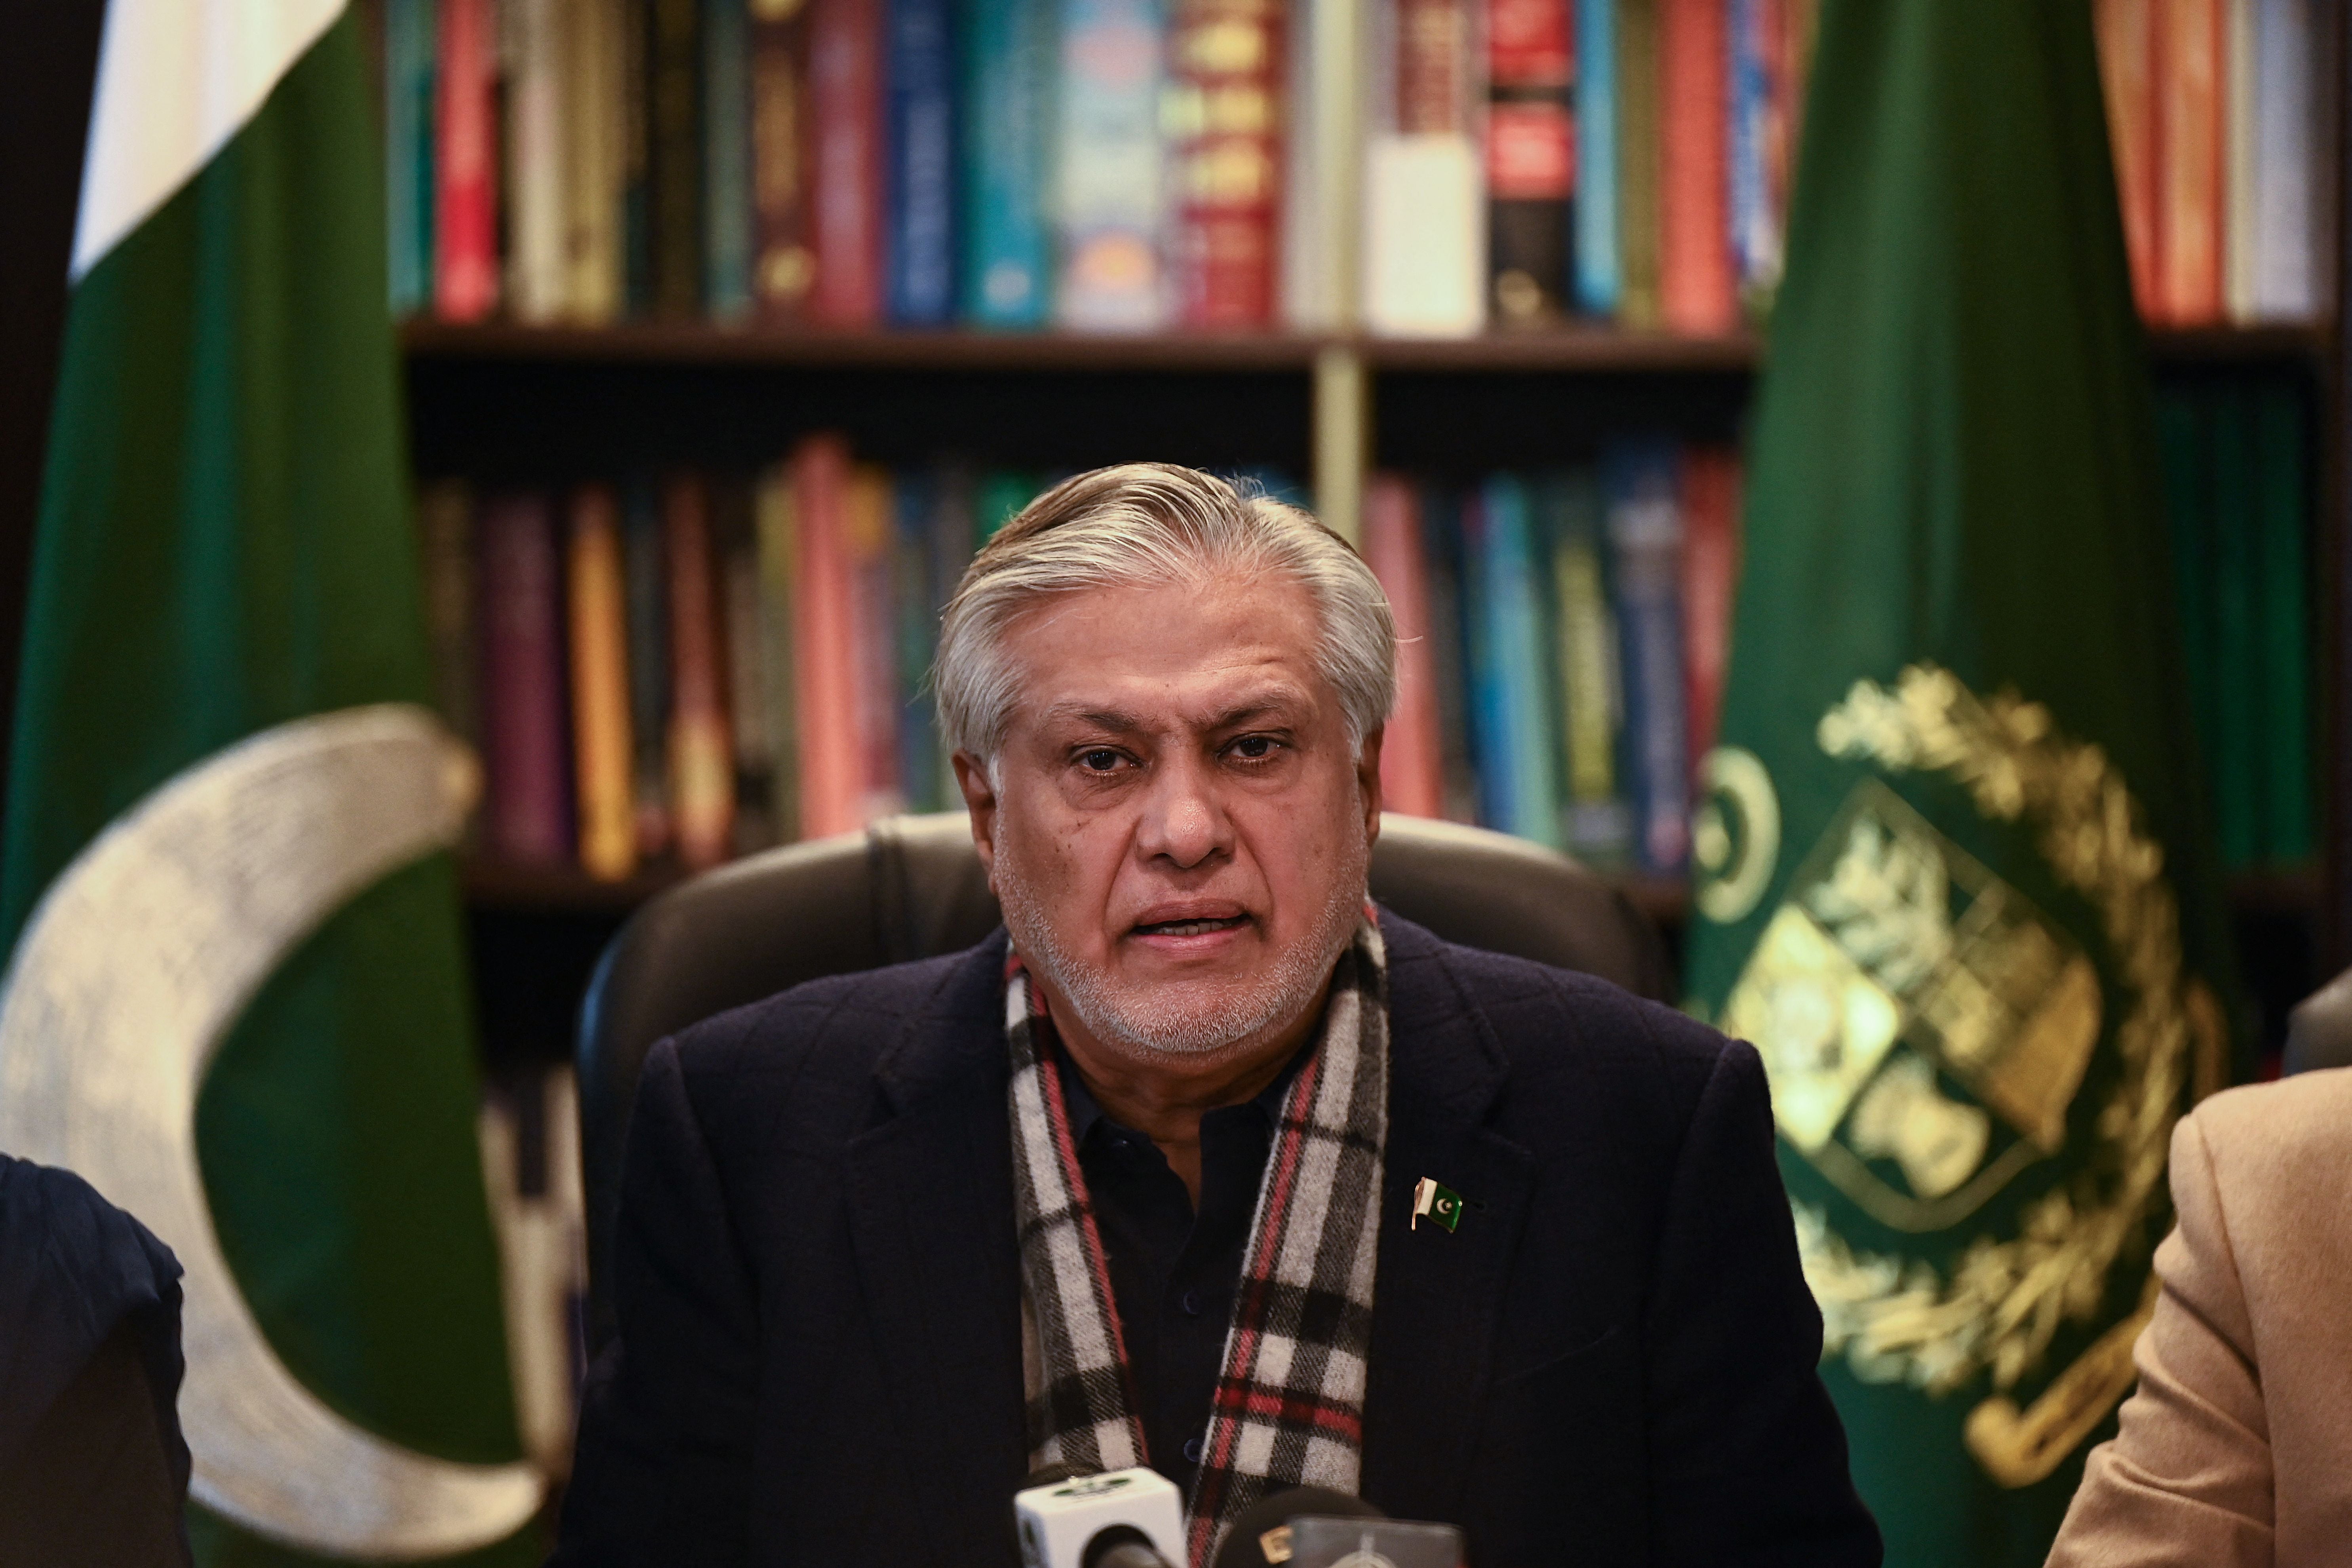 Pakistans finance minister Ishaq Dar speaks during a press conference in Islamabad